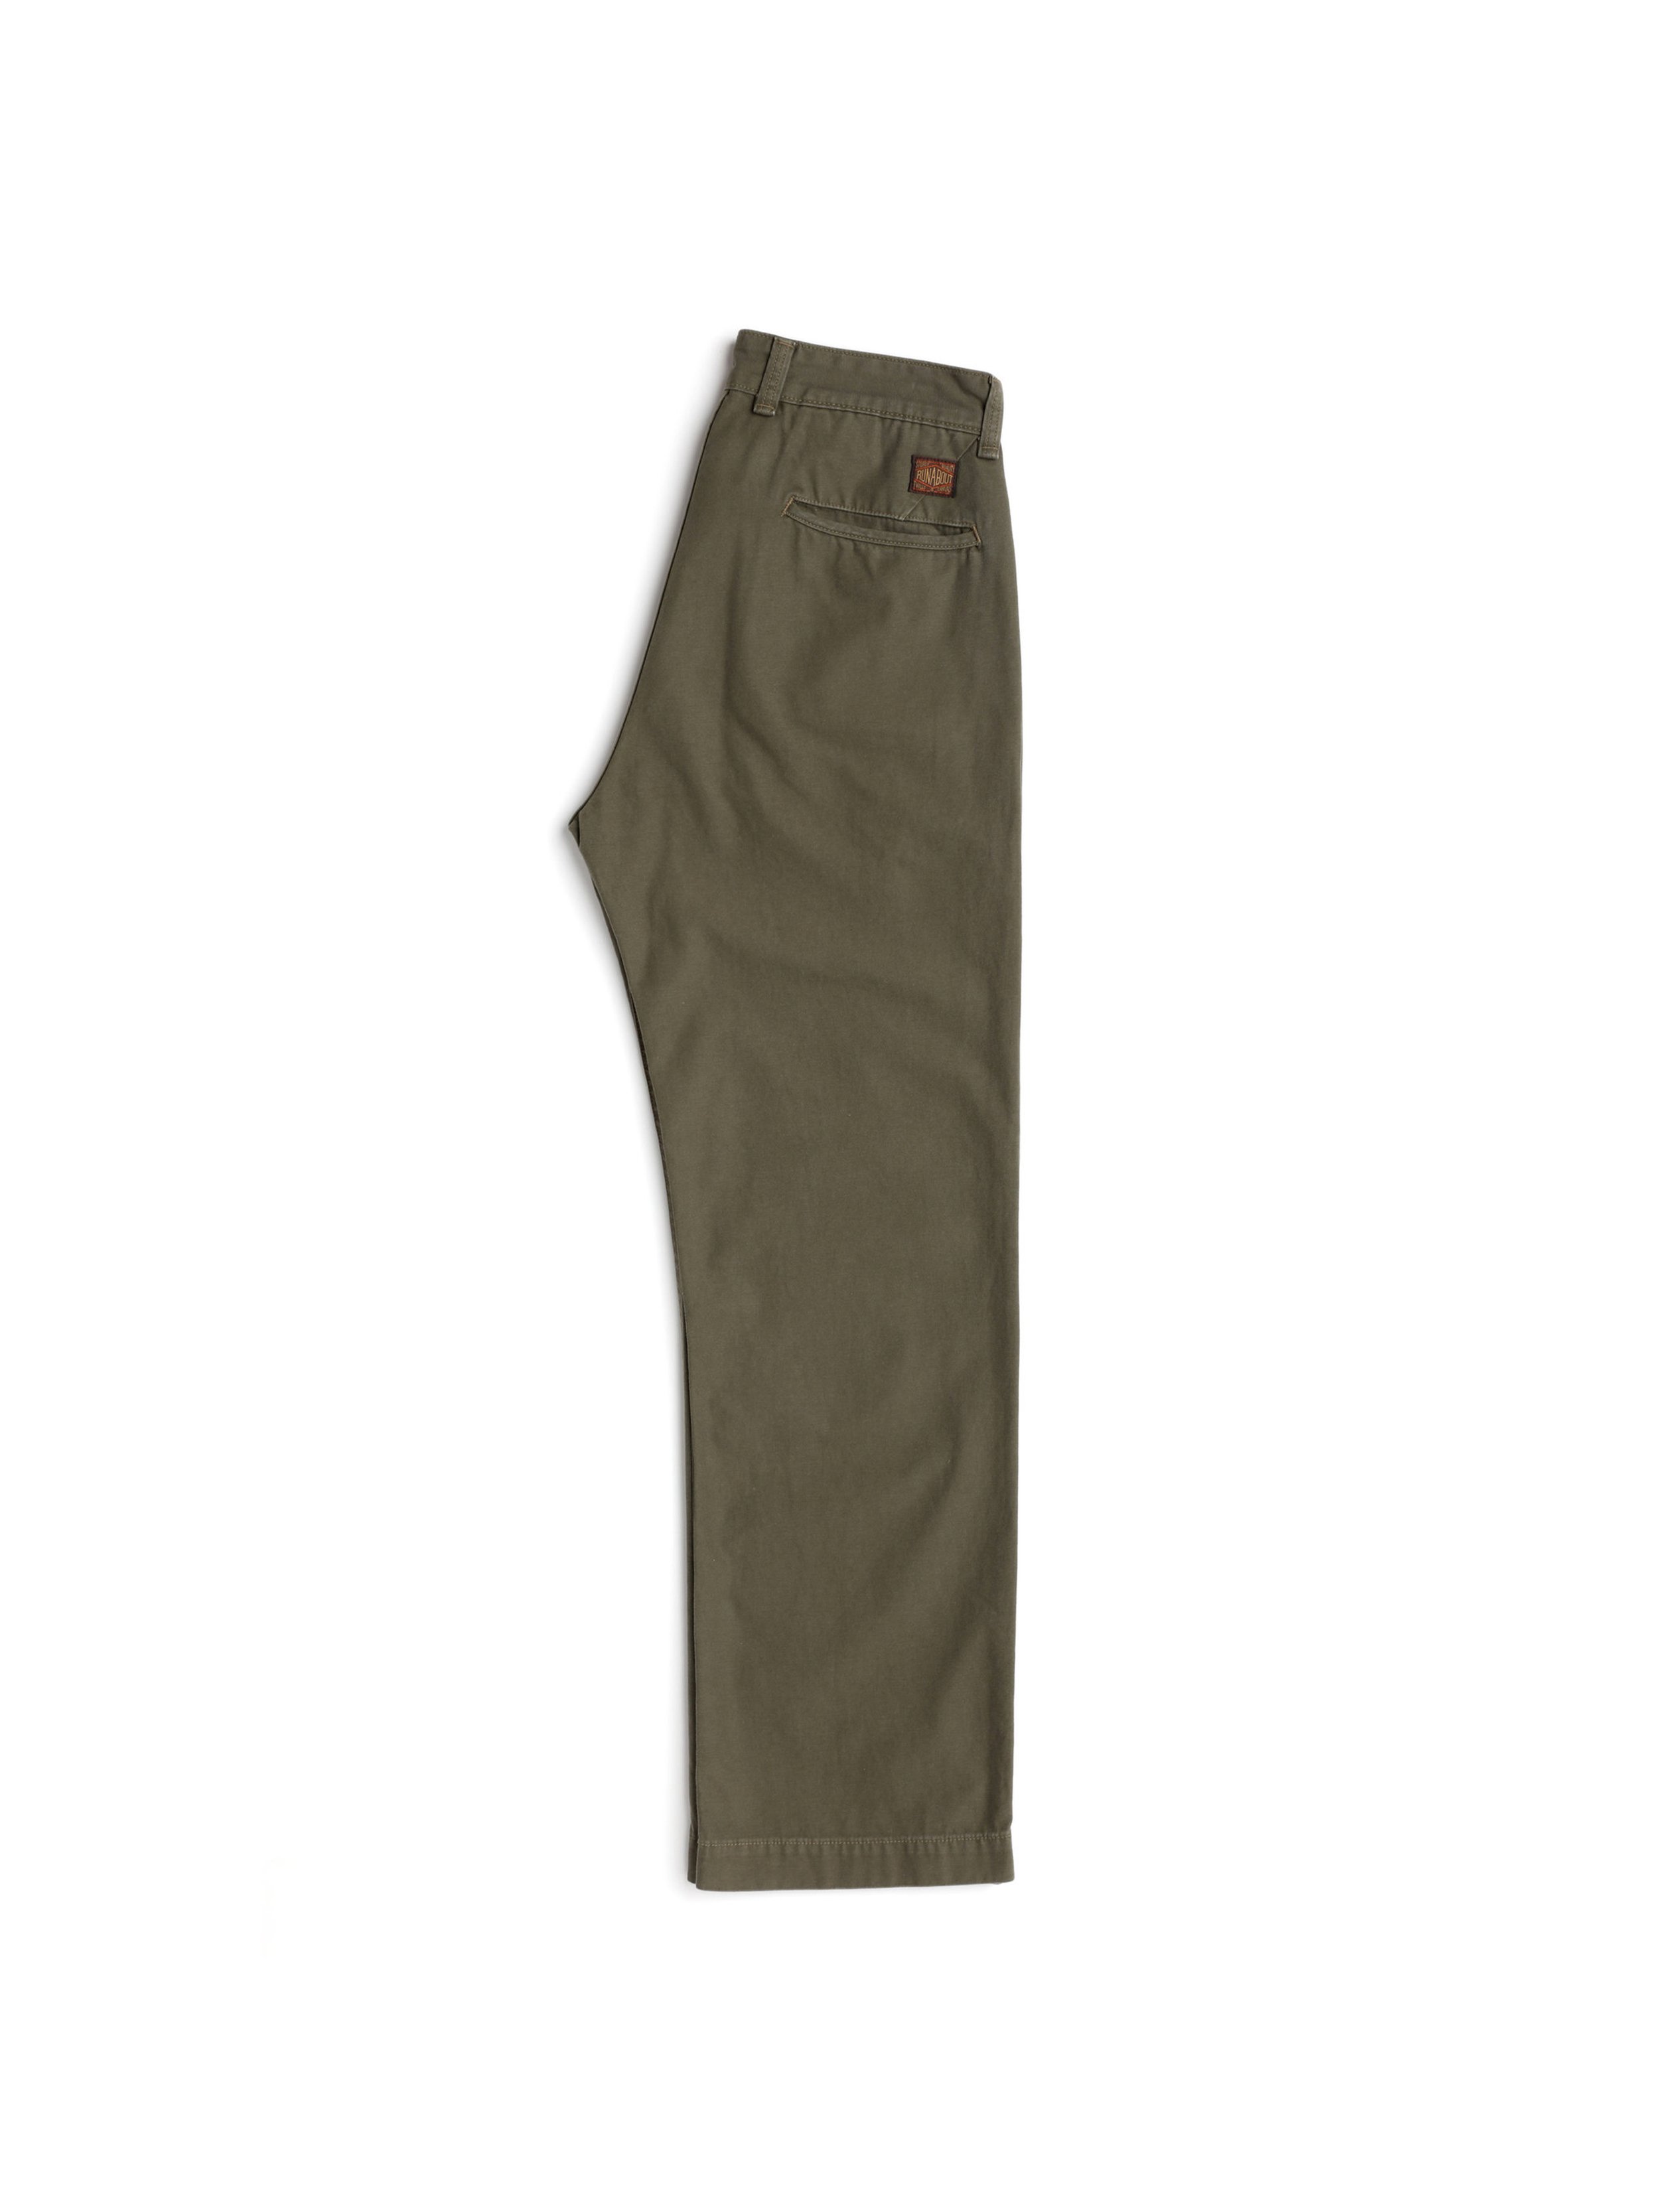 Trail Pant - Black — Runabout Goods